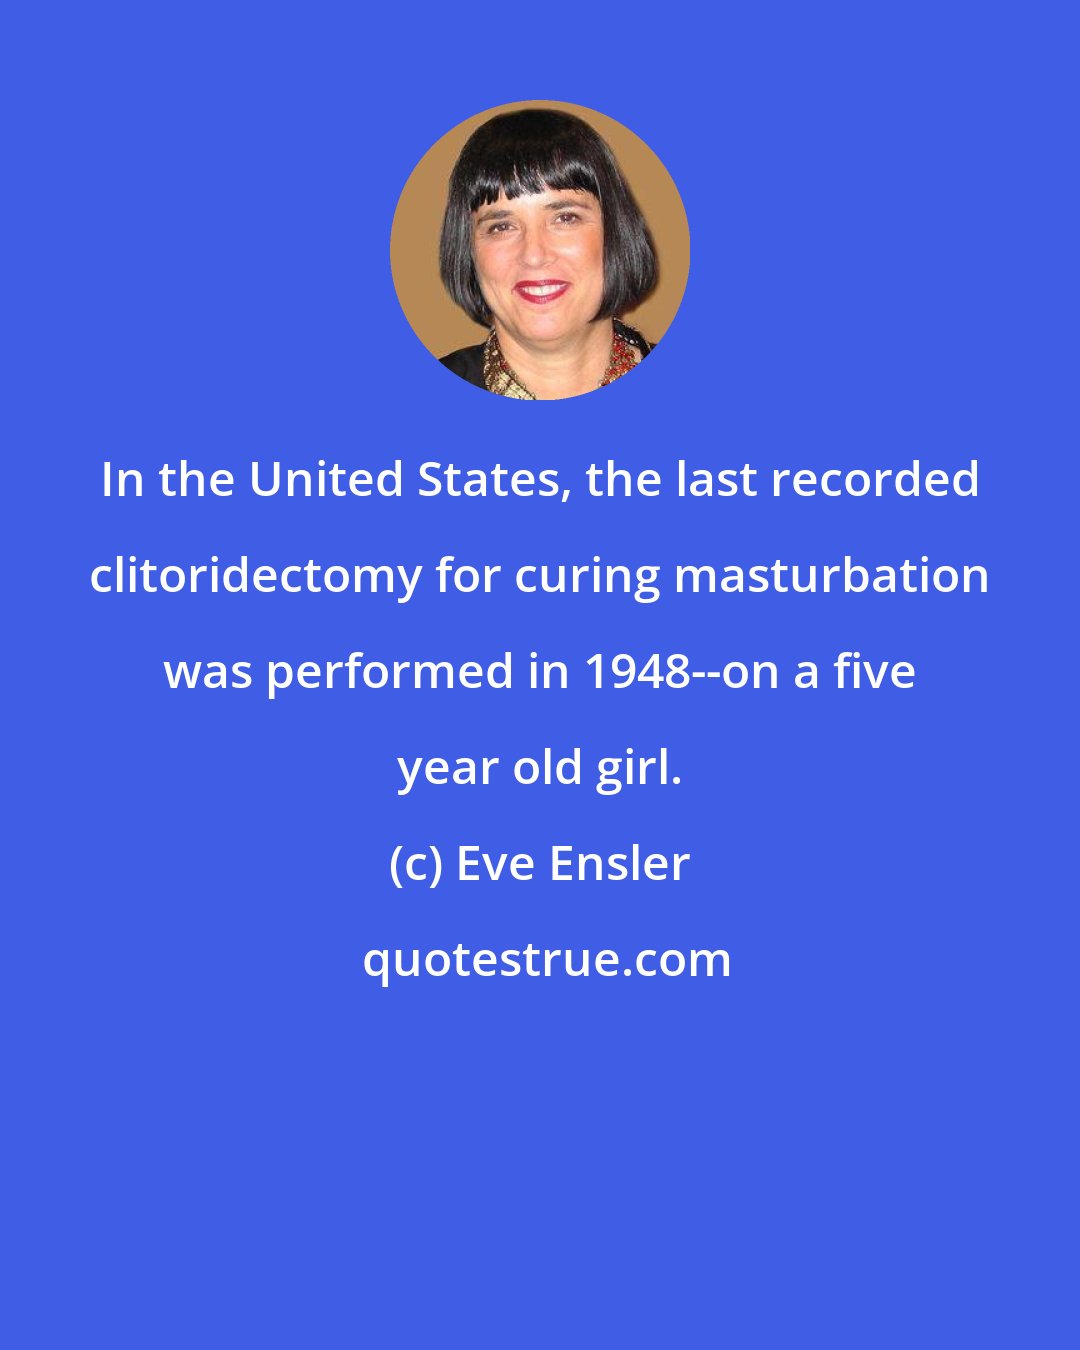 Eve Ensler: In the United States, the last recorded clitoridectomy for curing masturbation was performed in 1948--on a five year old girl.